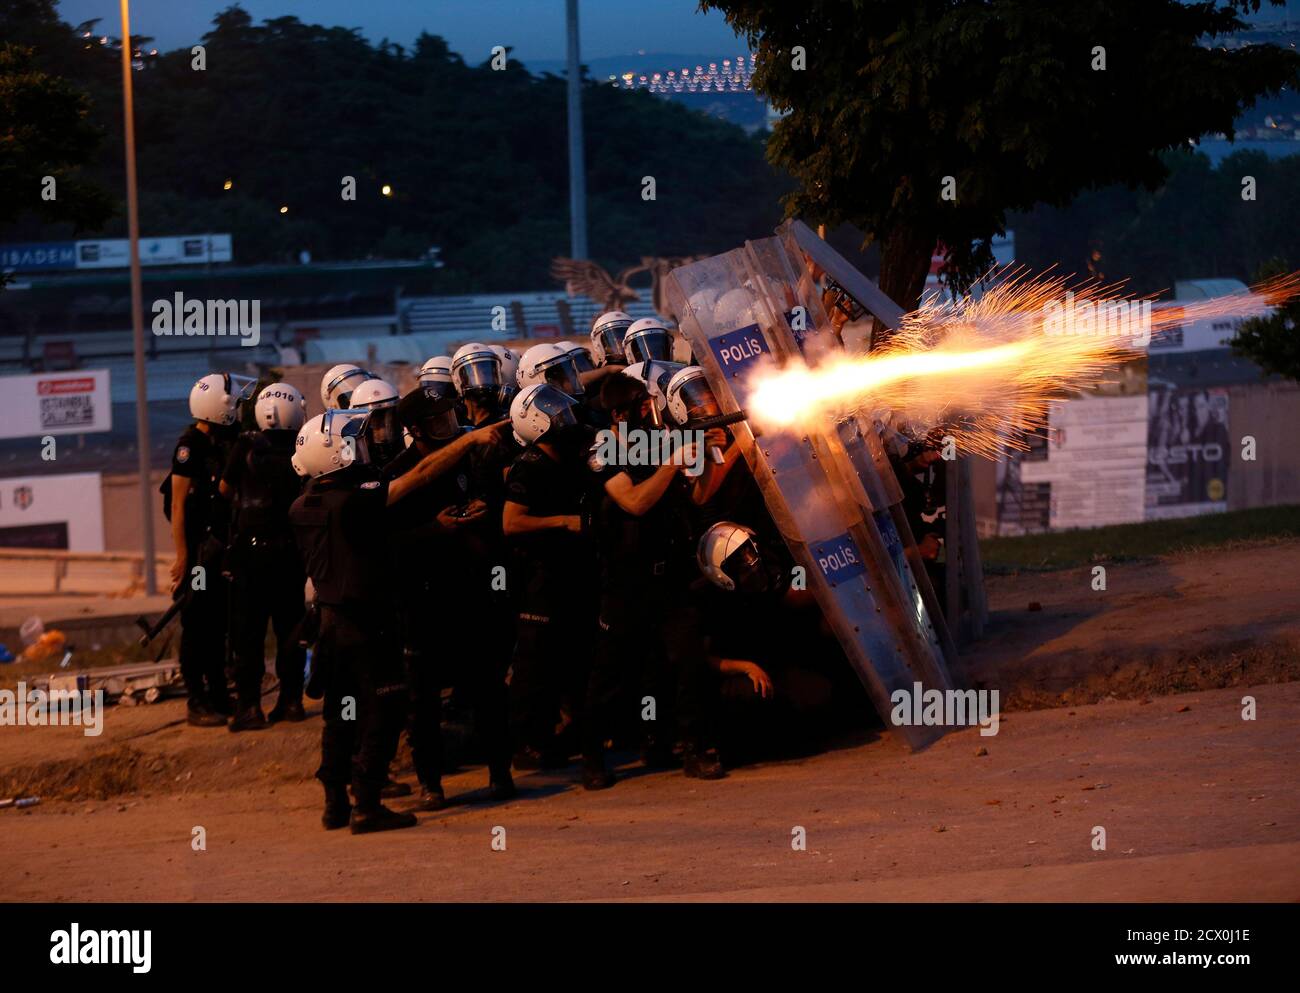 Riot police use tear gas to disperse the crowd during an anti-government protest in Istanbul June 3, 2013. Turkish Prime Minister Tayyip Erdogan accused anti-government protesters on Monday of walking 'arm-in-arm with terrorism', remarks that could further inflame public anger after three days of some of the most violent riots in decades. Hundreds of police and protesters have been injured since Friday in the riots, which began with a demonstration to halt construction in a park in an Istanbul square and grew into mass protests against what opponents call Erdogan's authoritarianism. REUTERS/Mu Stock Photo